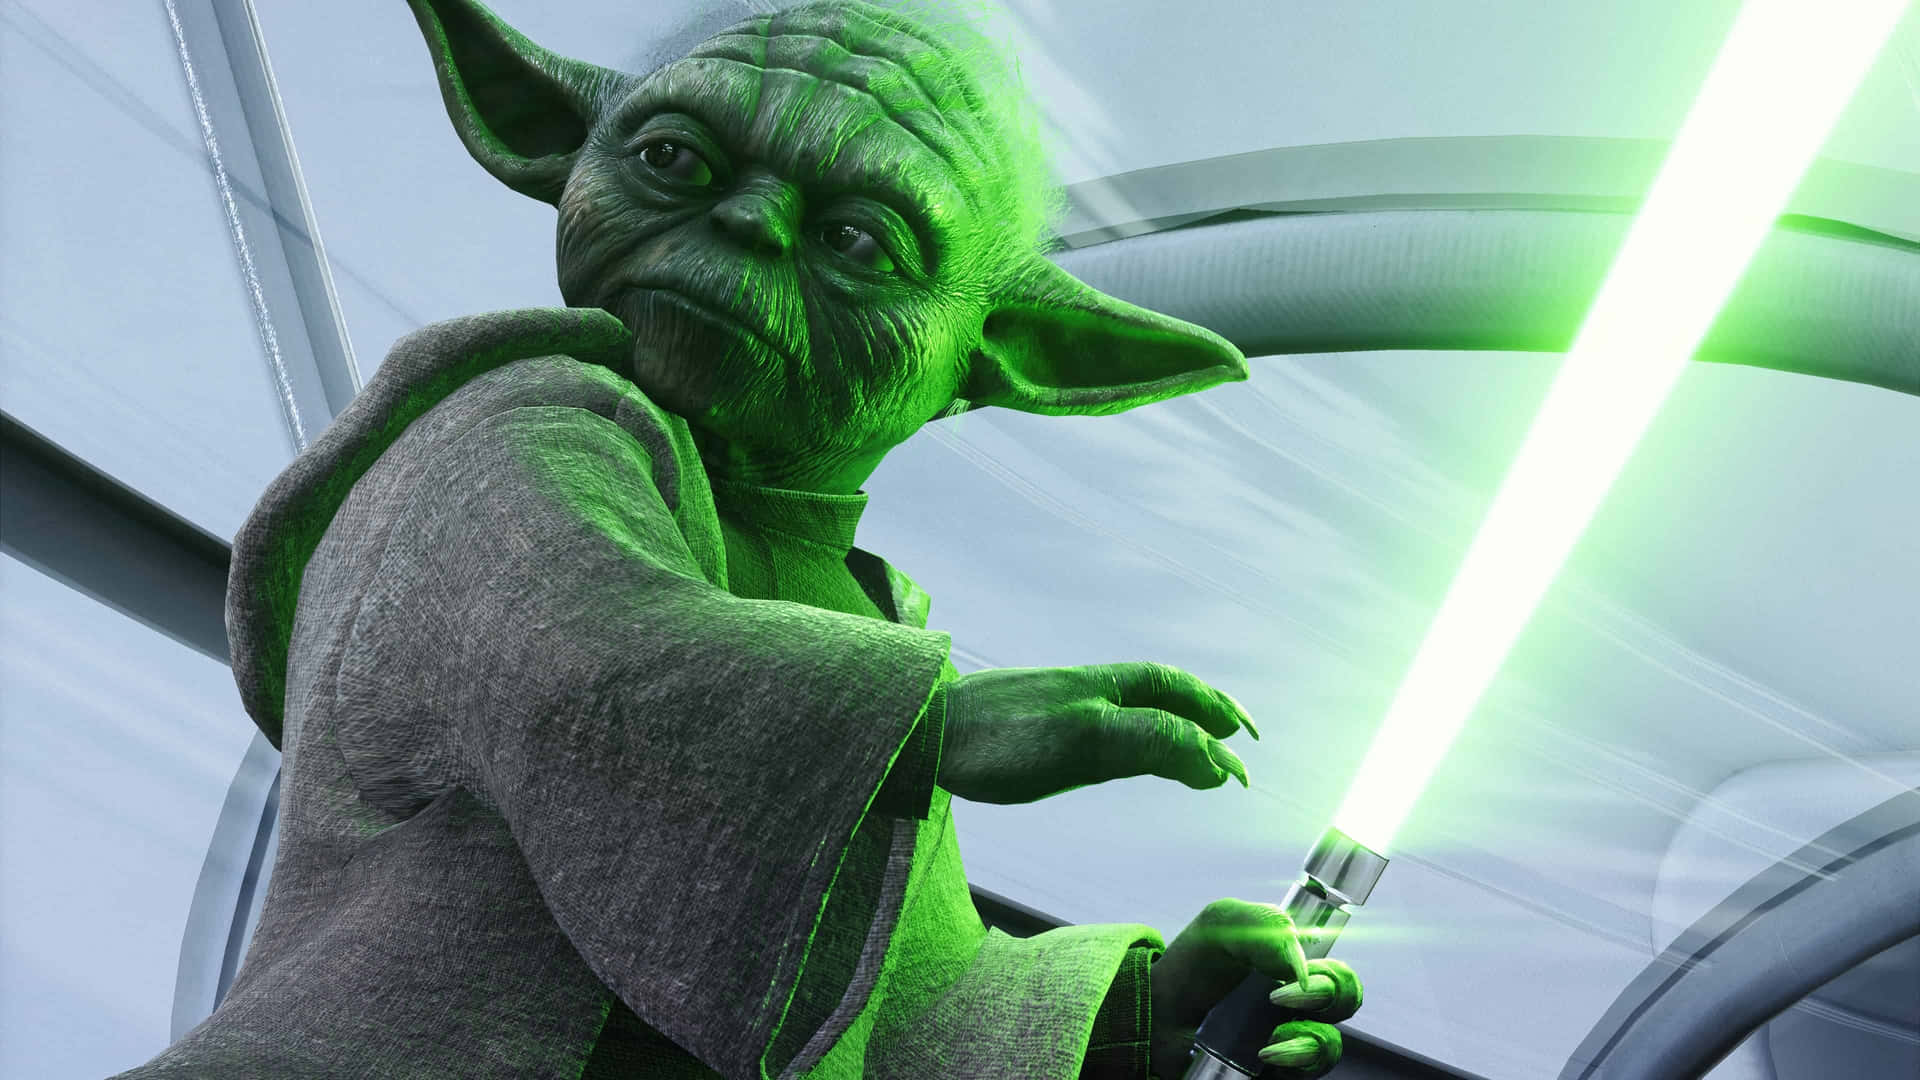 Master_ Yoda_with_ Lightsaber_ Ultra_ Wide Wallpaper